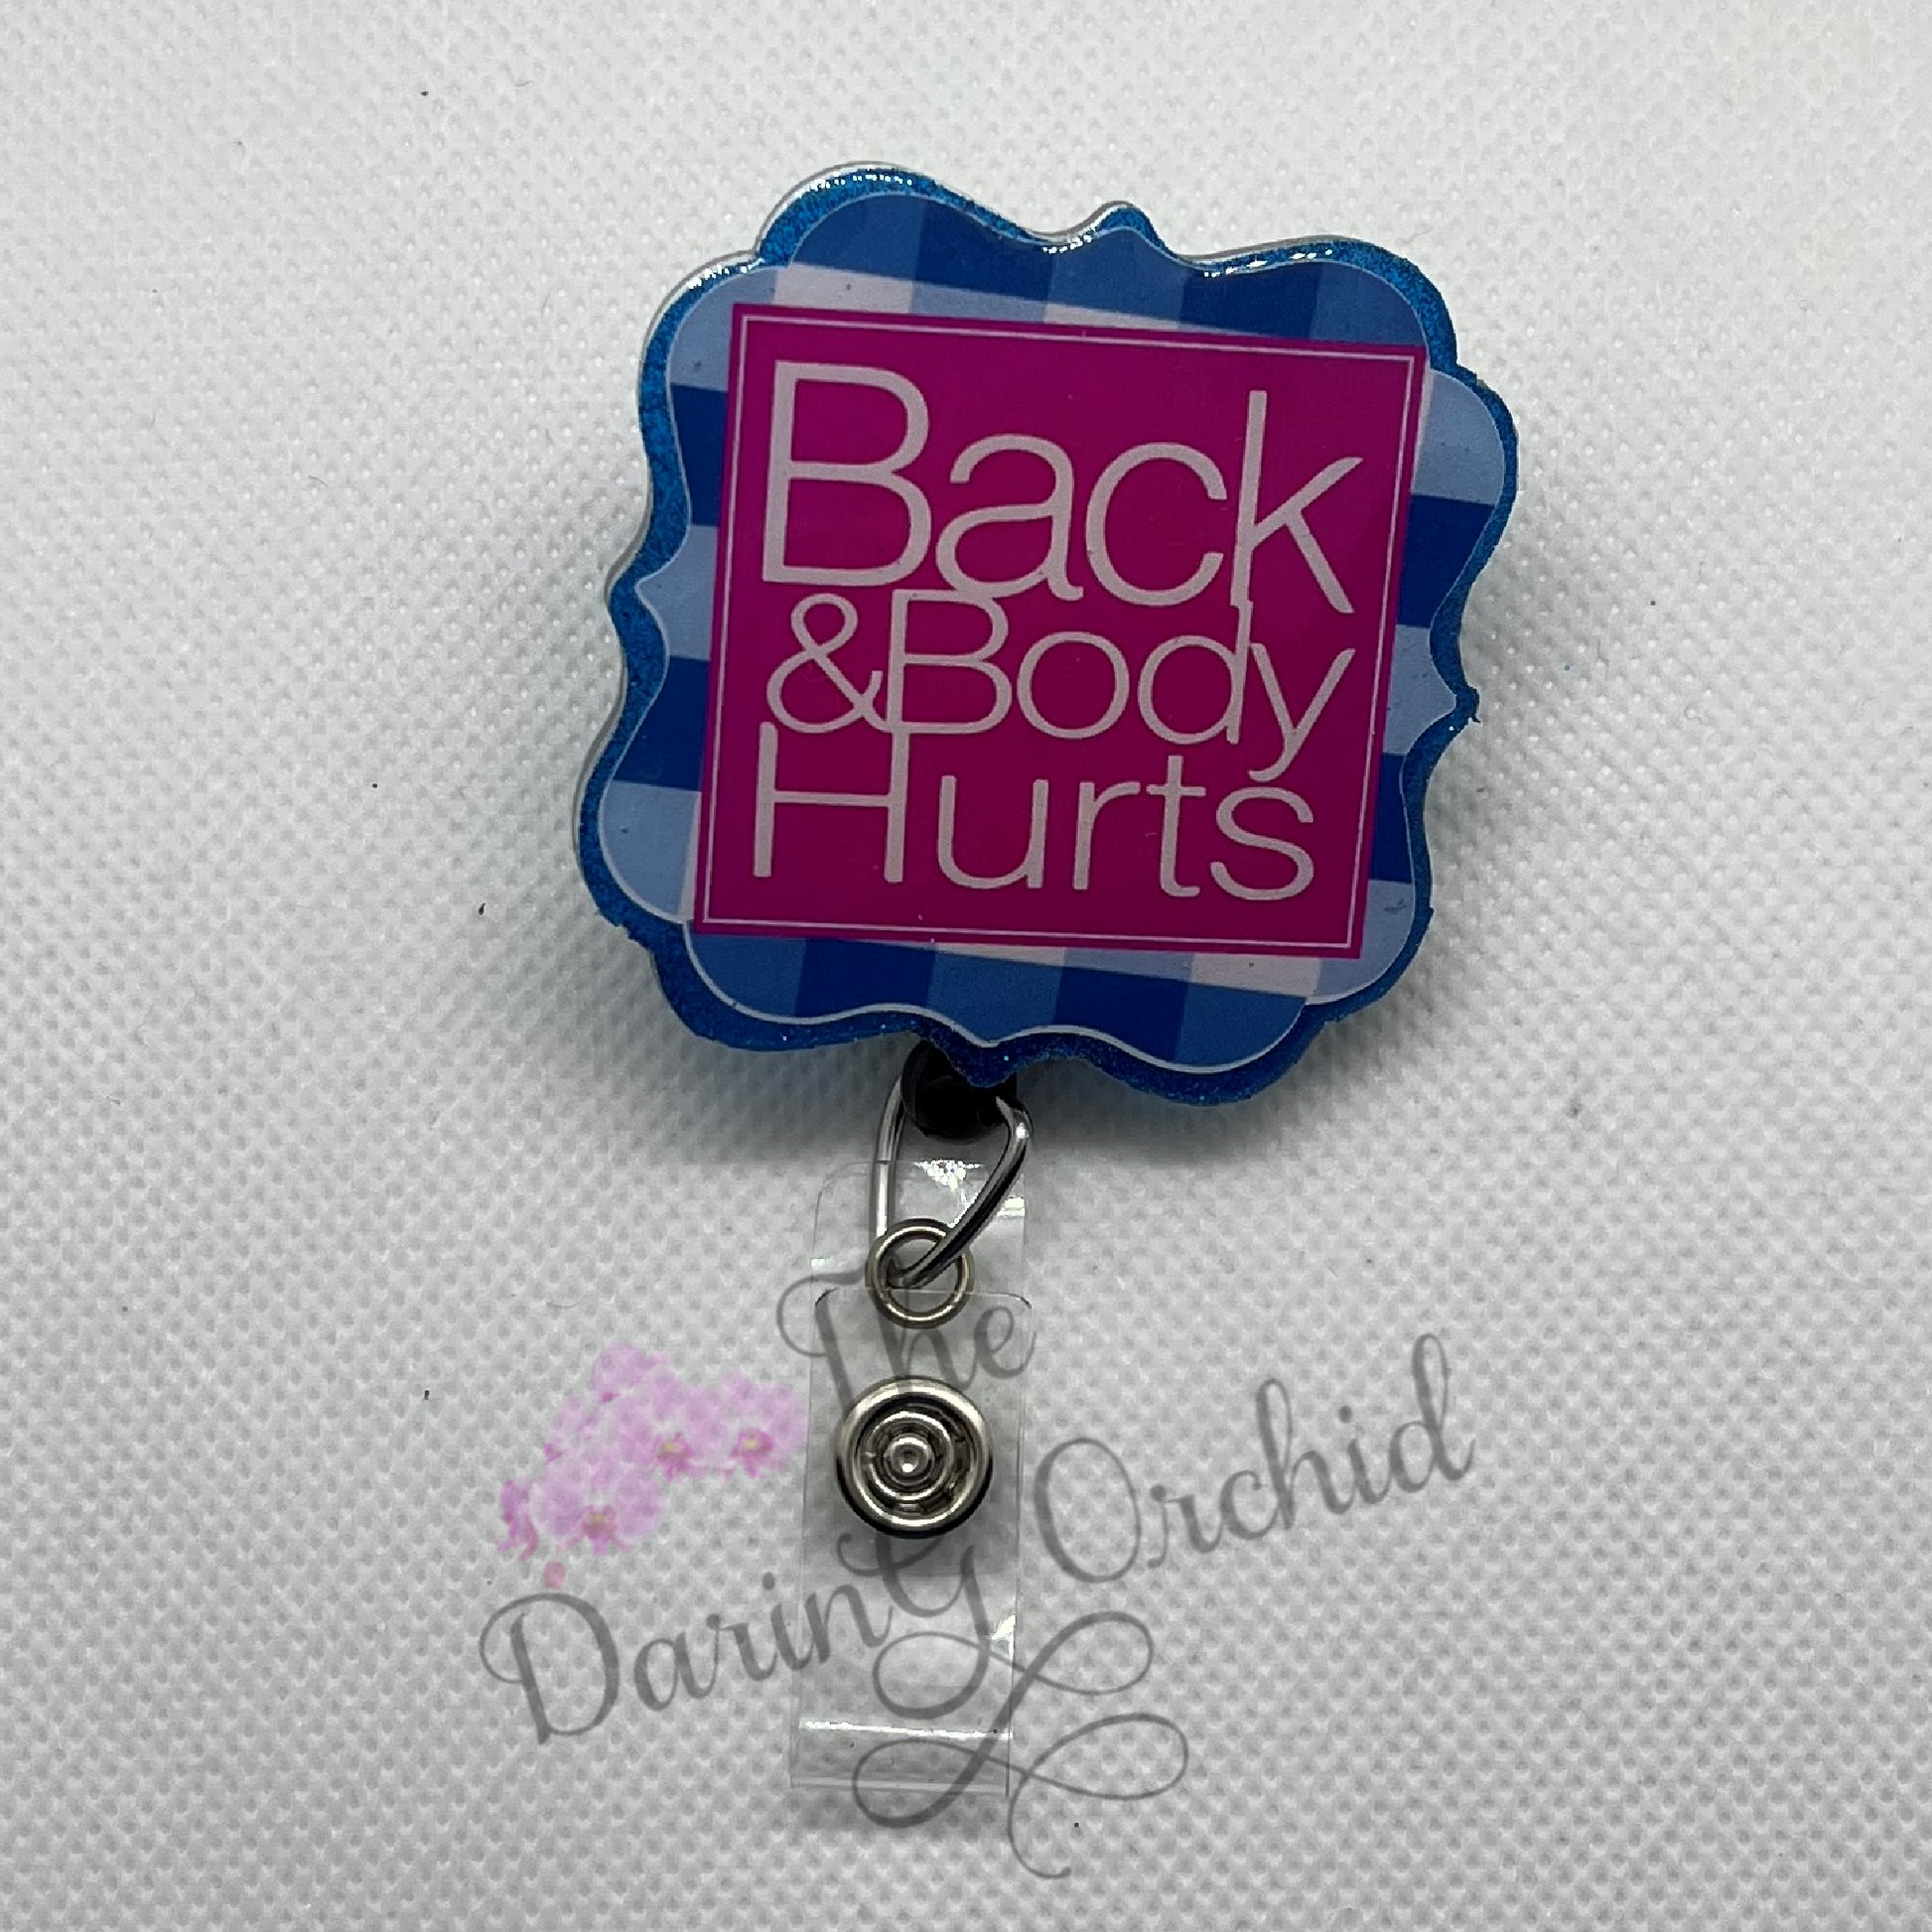 Back and Body Hurts Badge holder reel, ID Holder, Nurse – The Daring Orchid